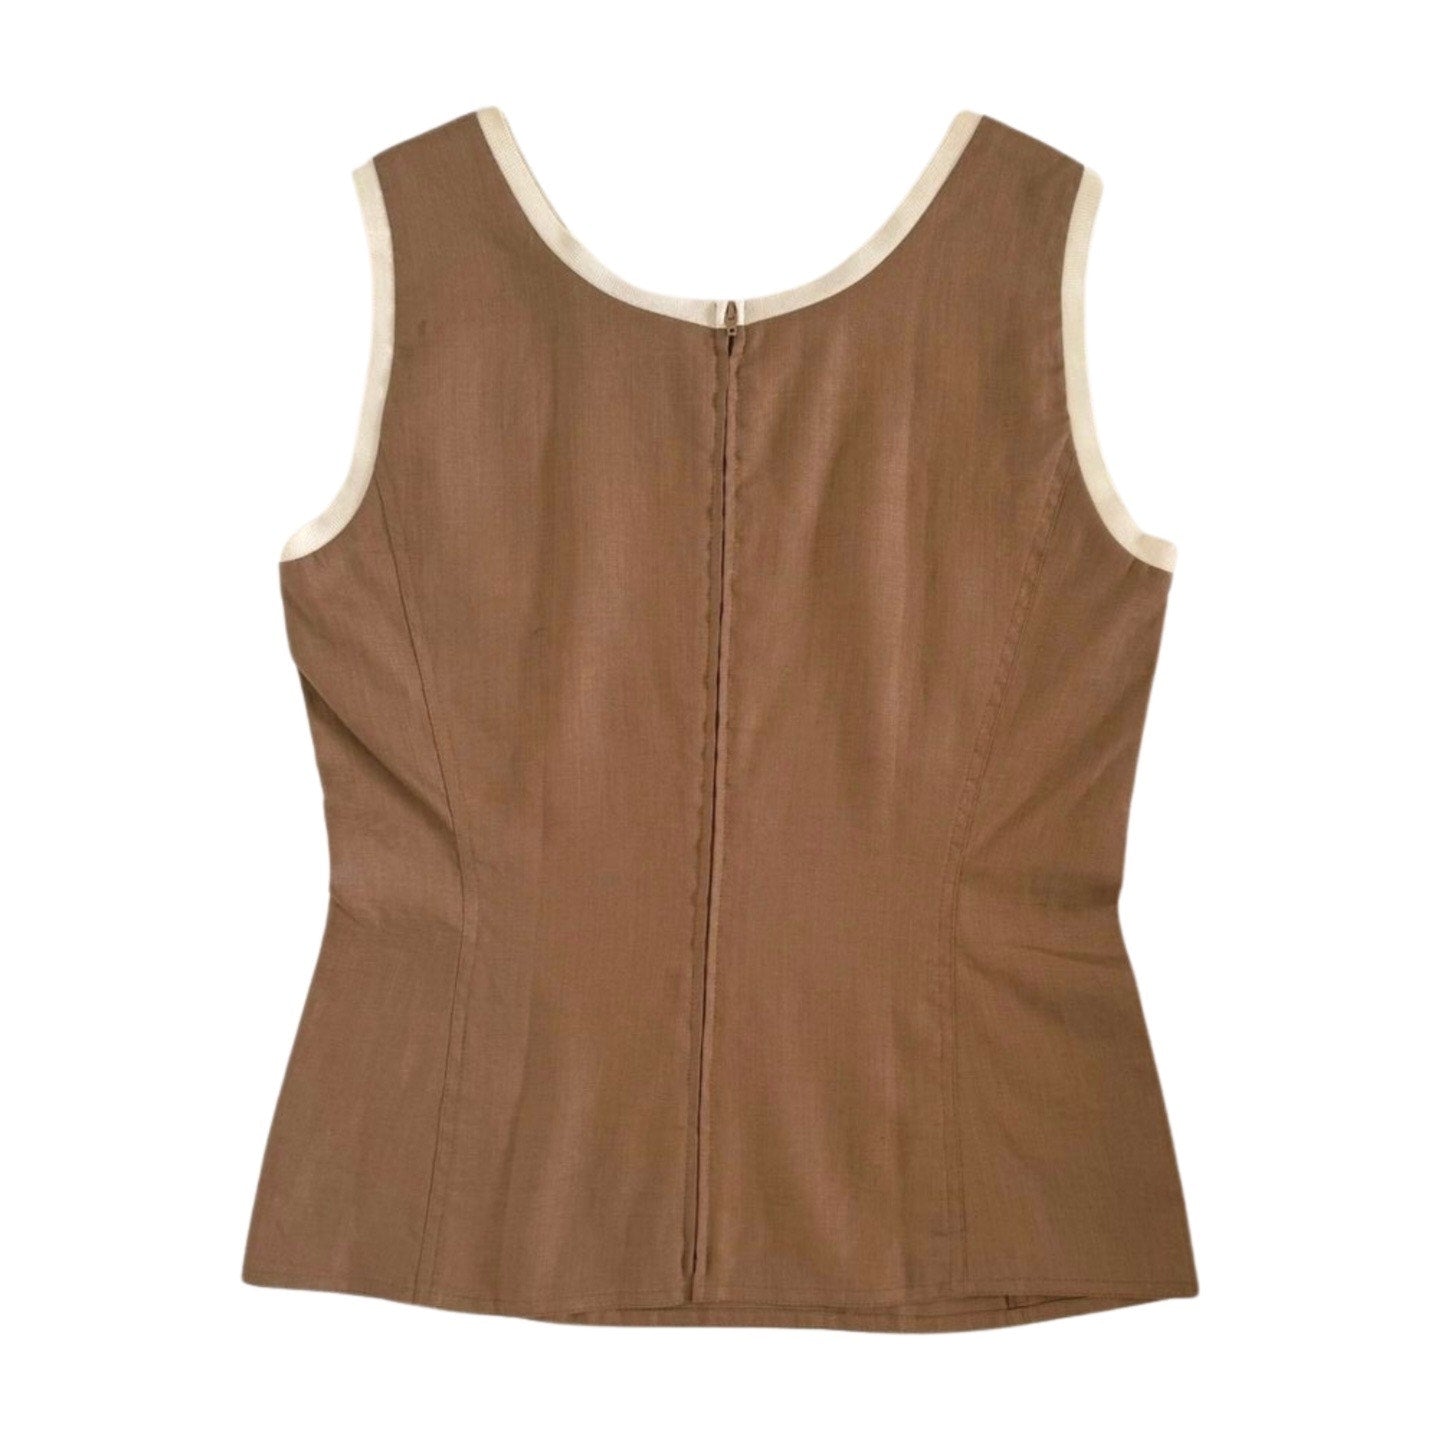 A Valentino Miss V Linen Tank Top by Valentino Miss V with a scoop neckline and a fitted silhouette. The back features a zipper closure, and the edges are lined with a beige trim. Made from 100% linen, this summer top has a slightly textured appearance, reminiscent of vintage Valentino elegance.